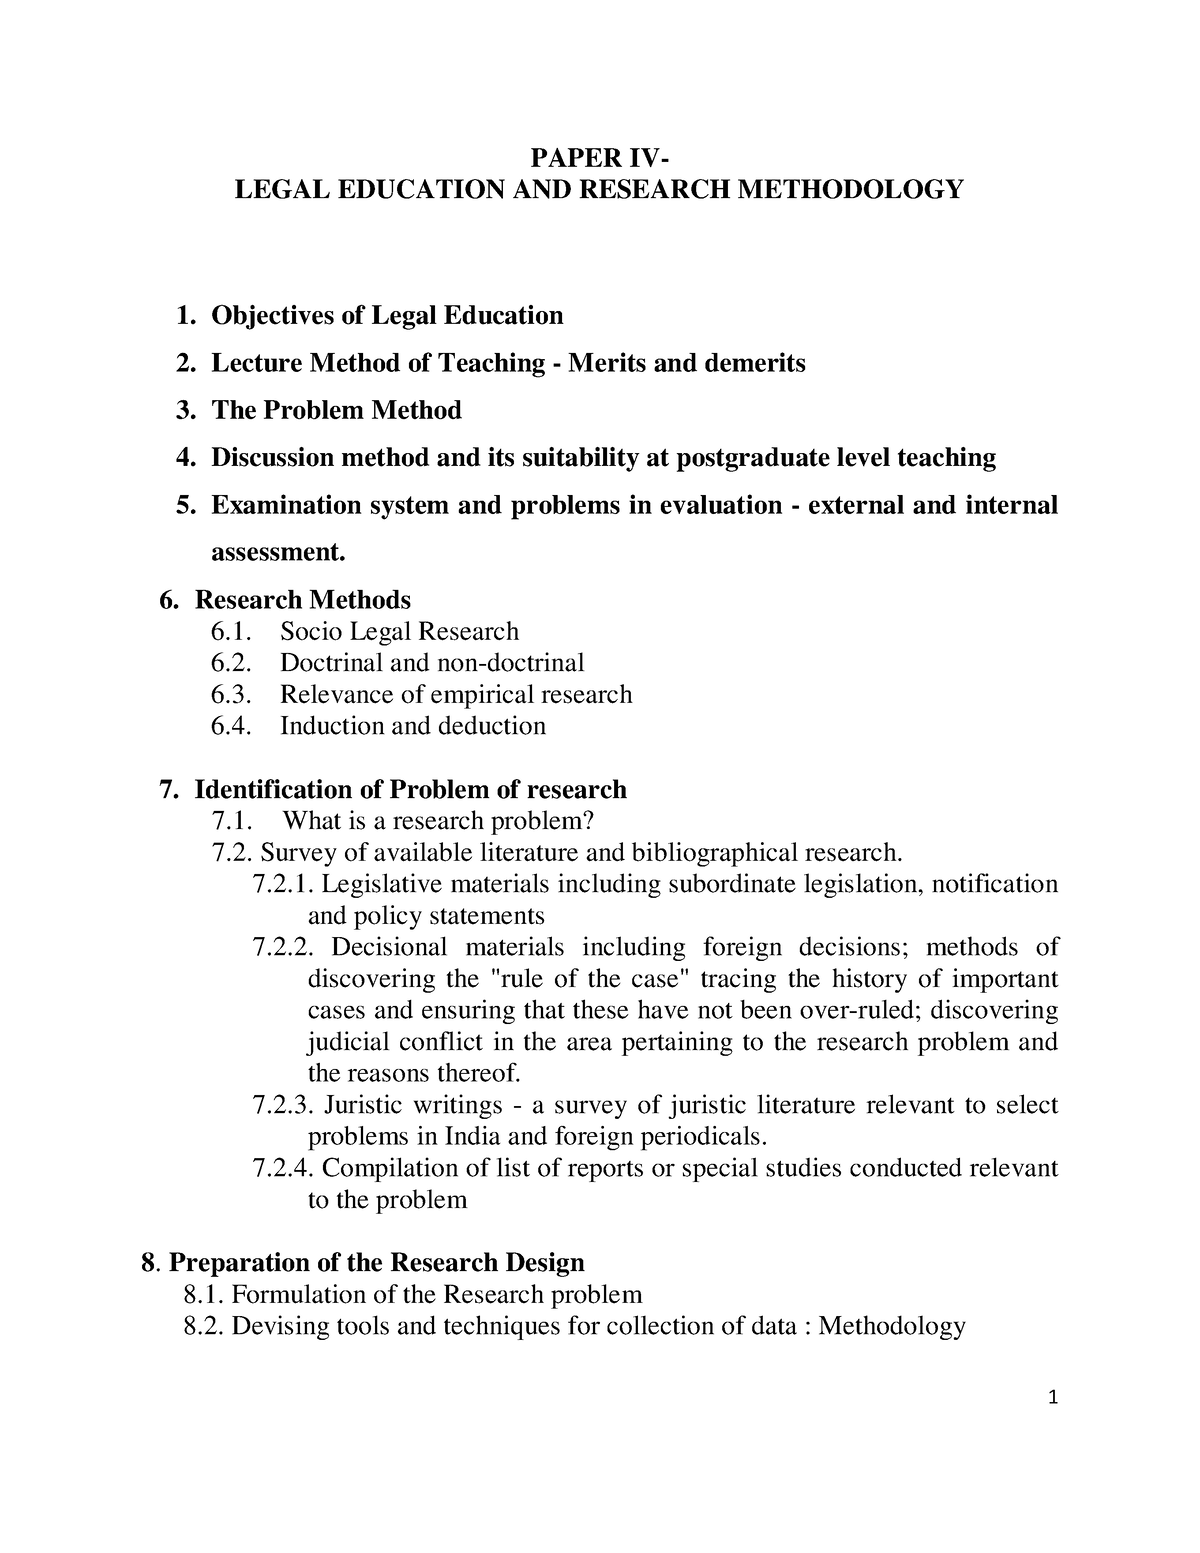 llm research methodology question paper